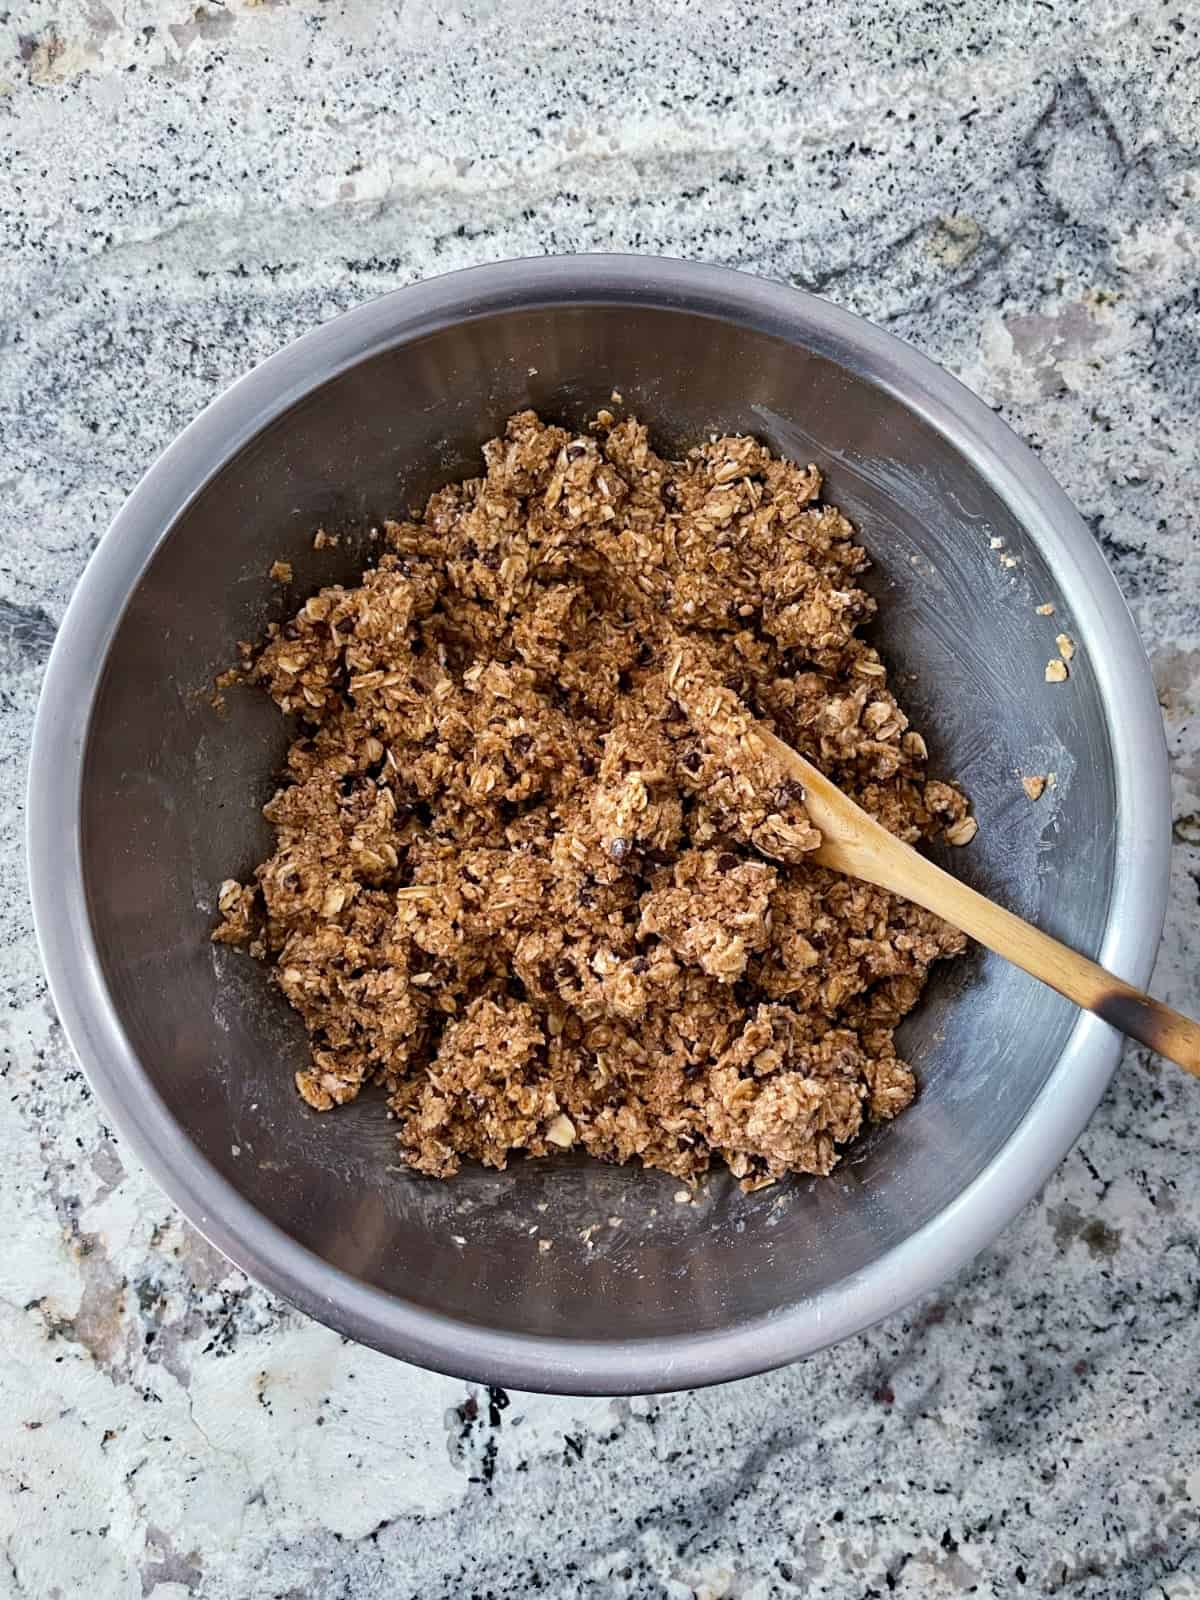 Stirring Kodiak no-bake oatmeal chocolate chip protein bite mix with honey, water and peanut butter in mixing bowl with wooden spoon.